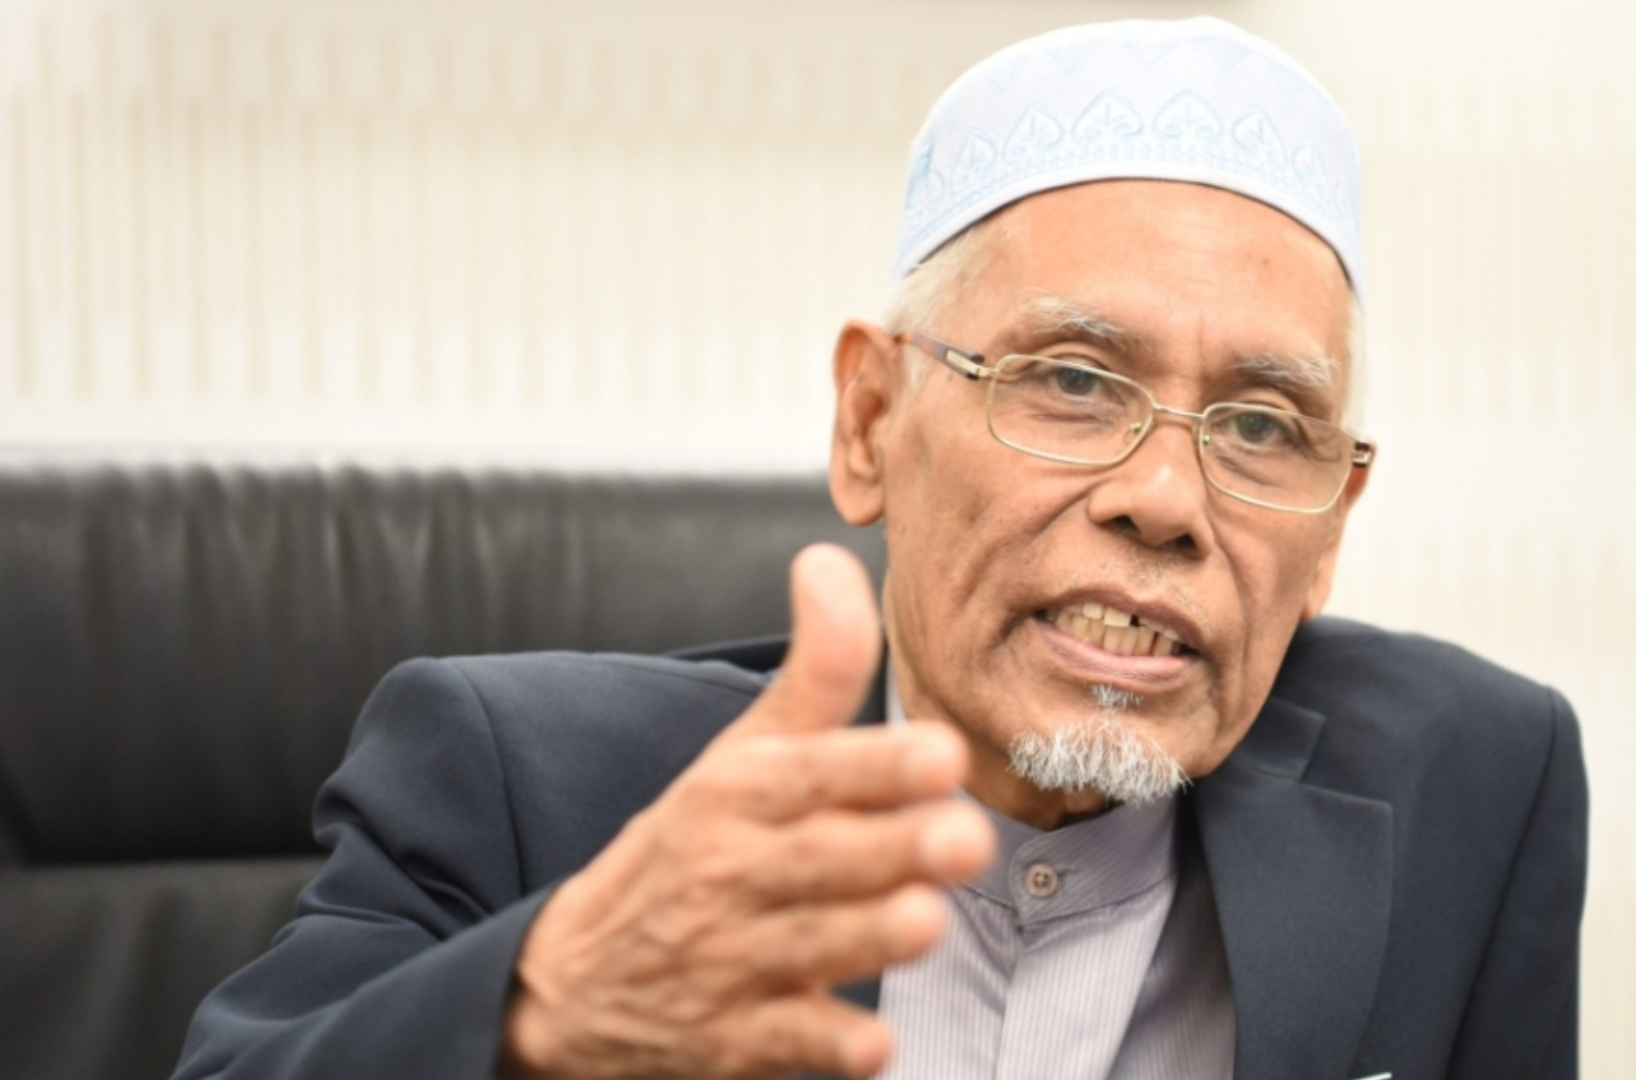 Bigotry damages morals: Penang mufti condemns extreme boycotts